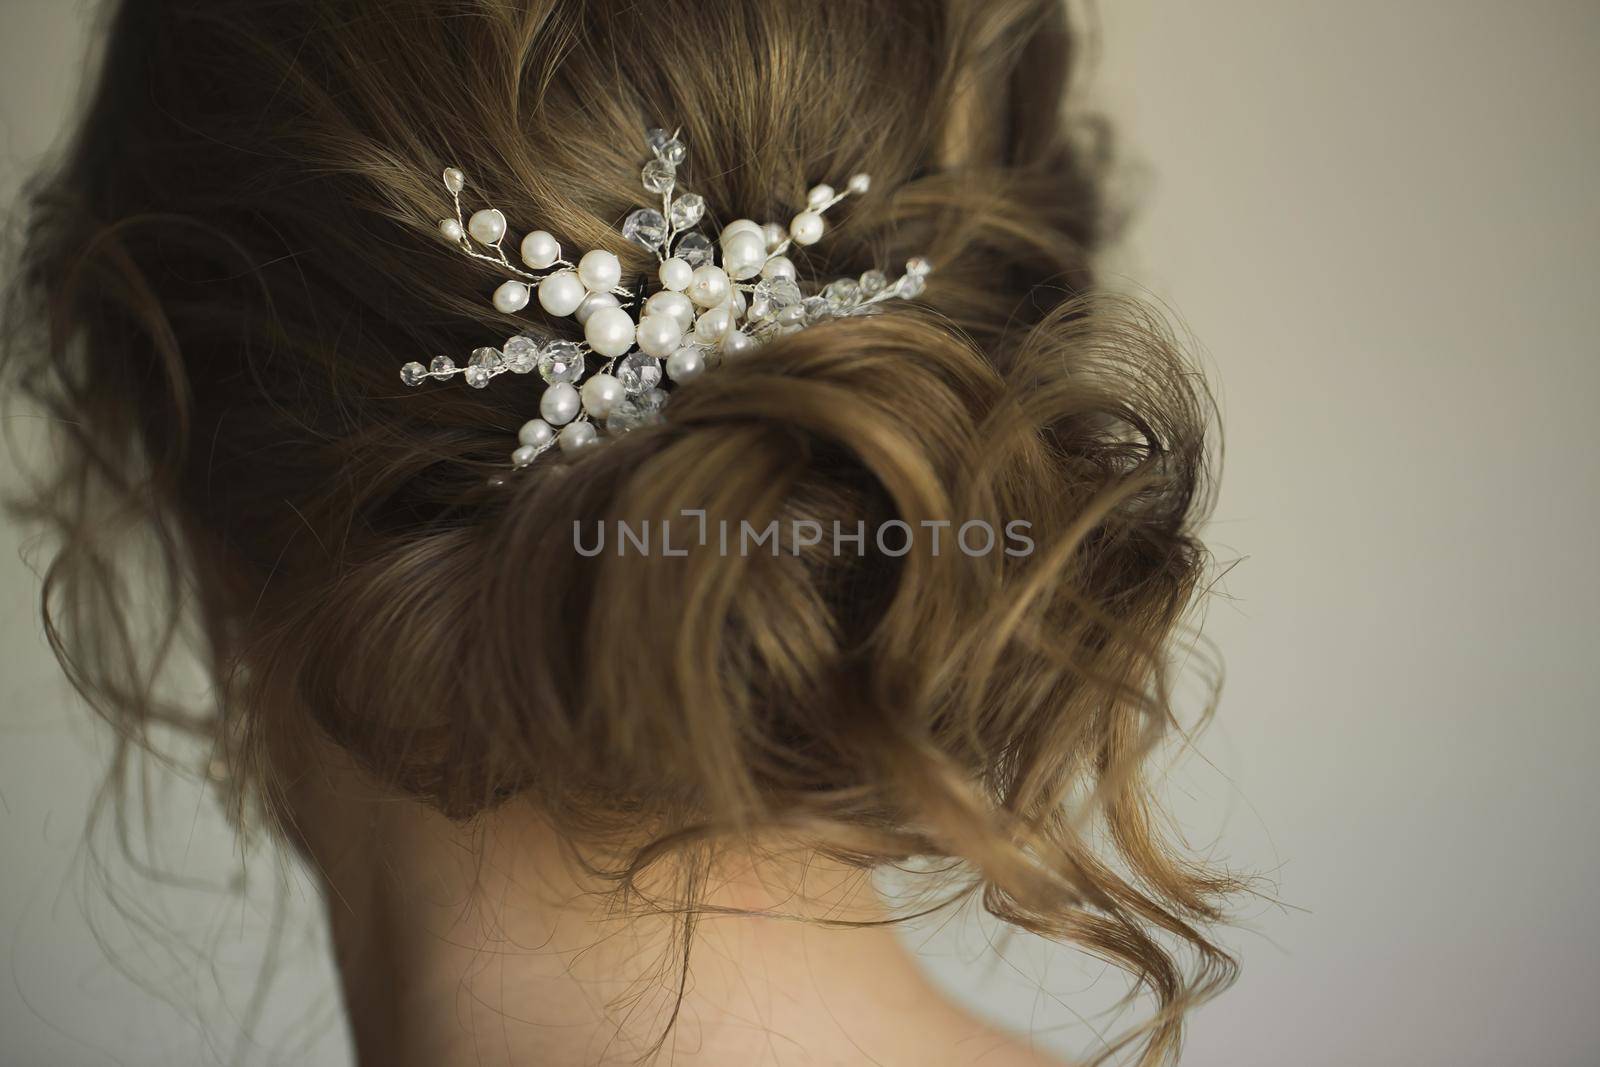 Bridal wedding hairstyle with jewelry. Elegant hair accessorie by StudioPeace